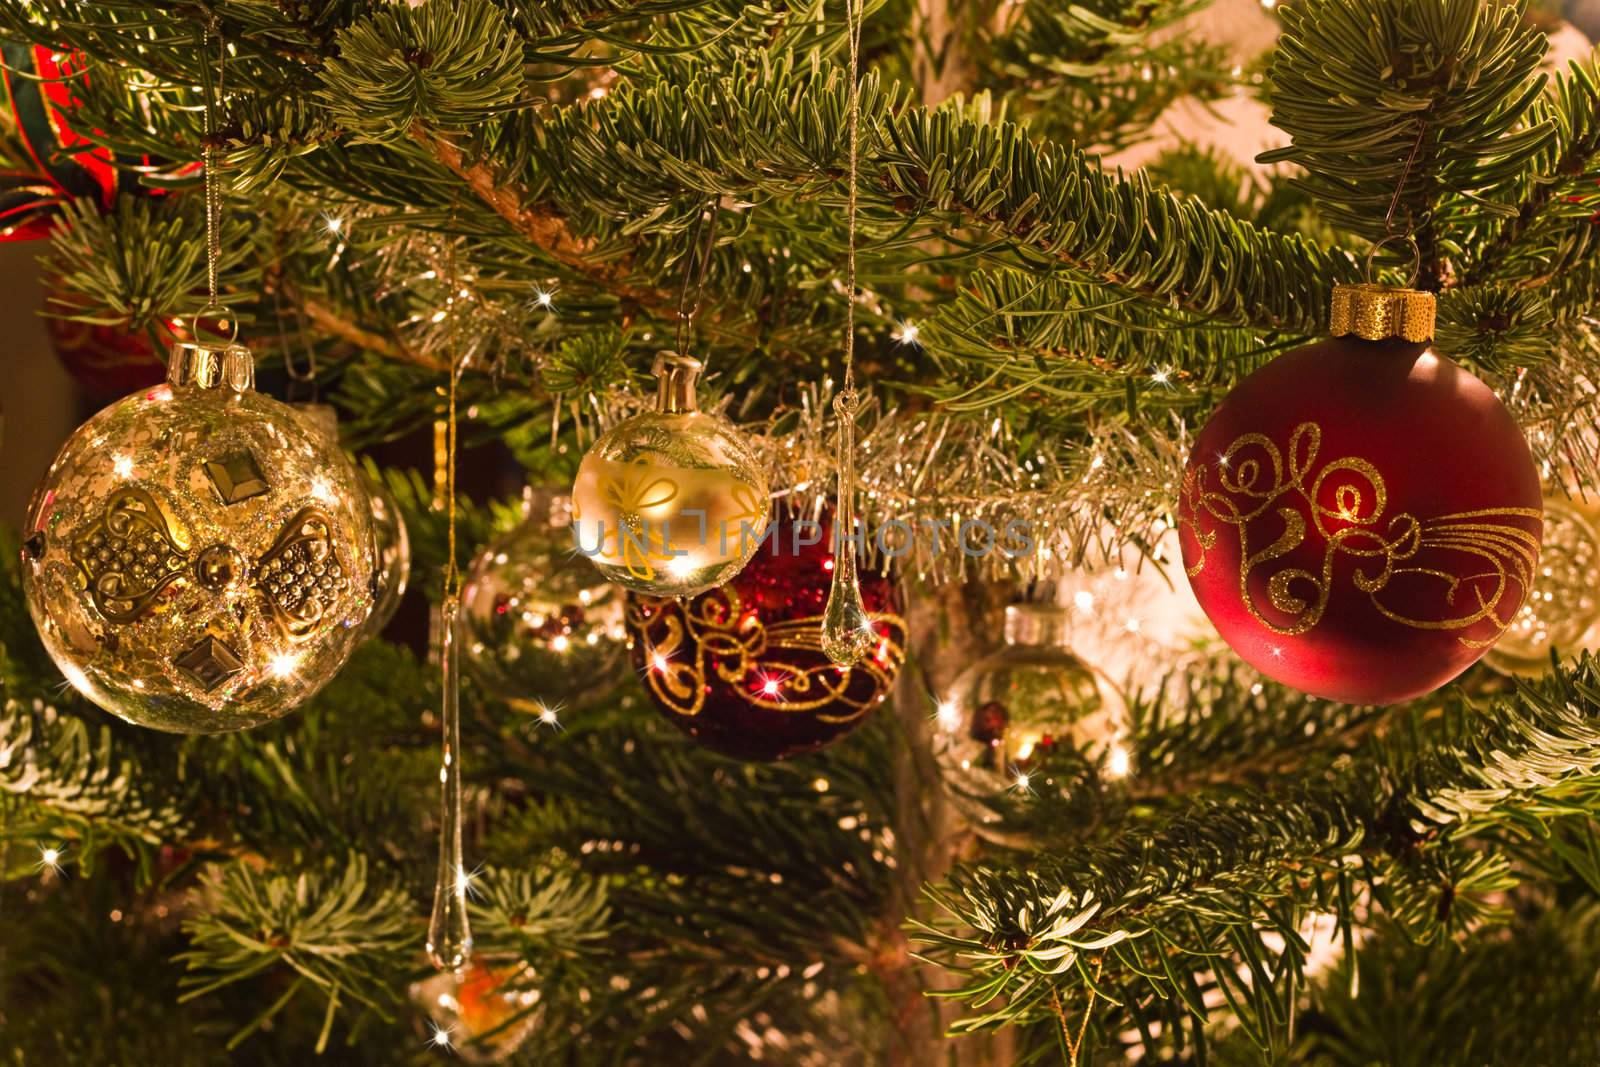 Decoration in christmas tree by Colette